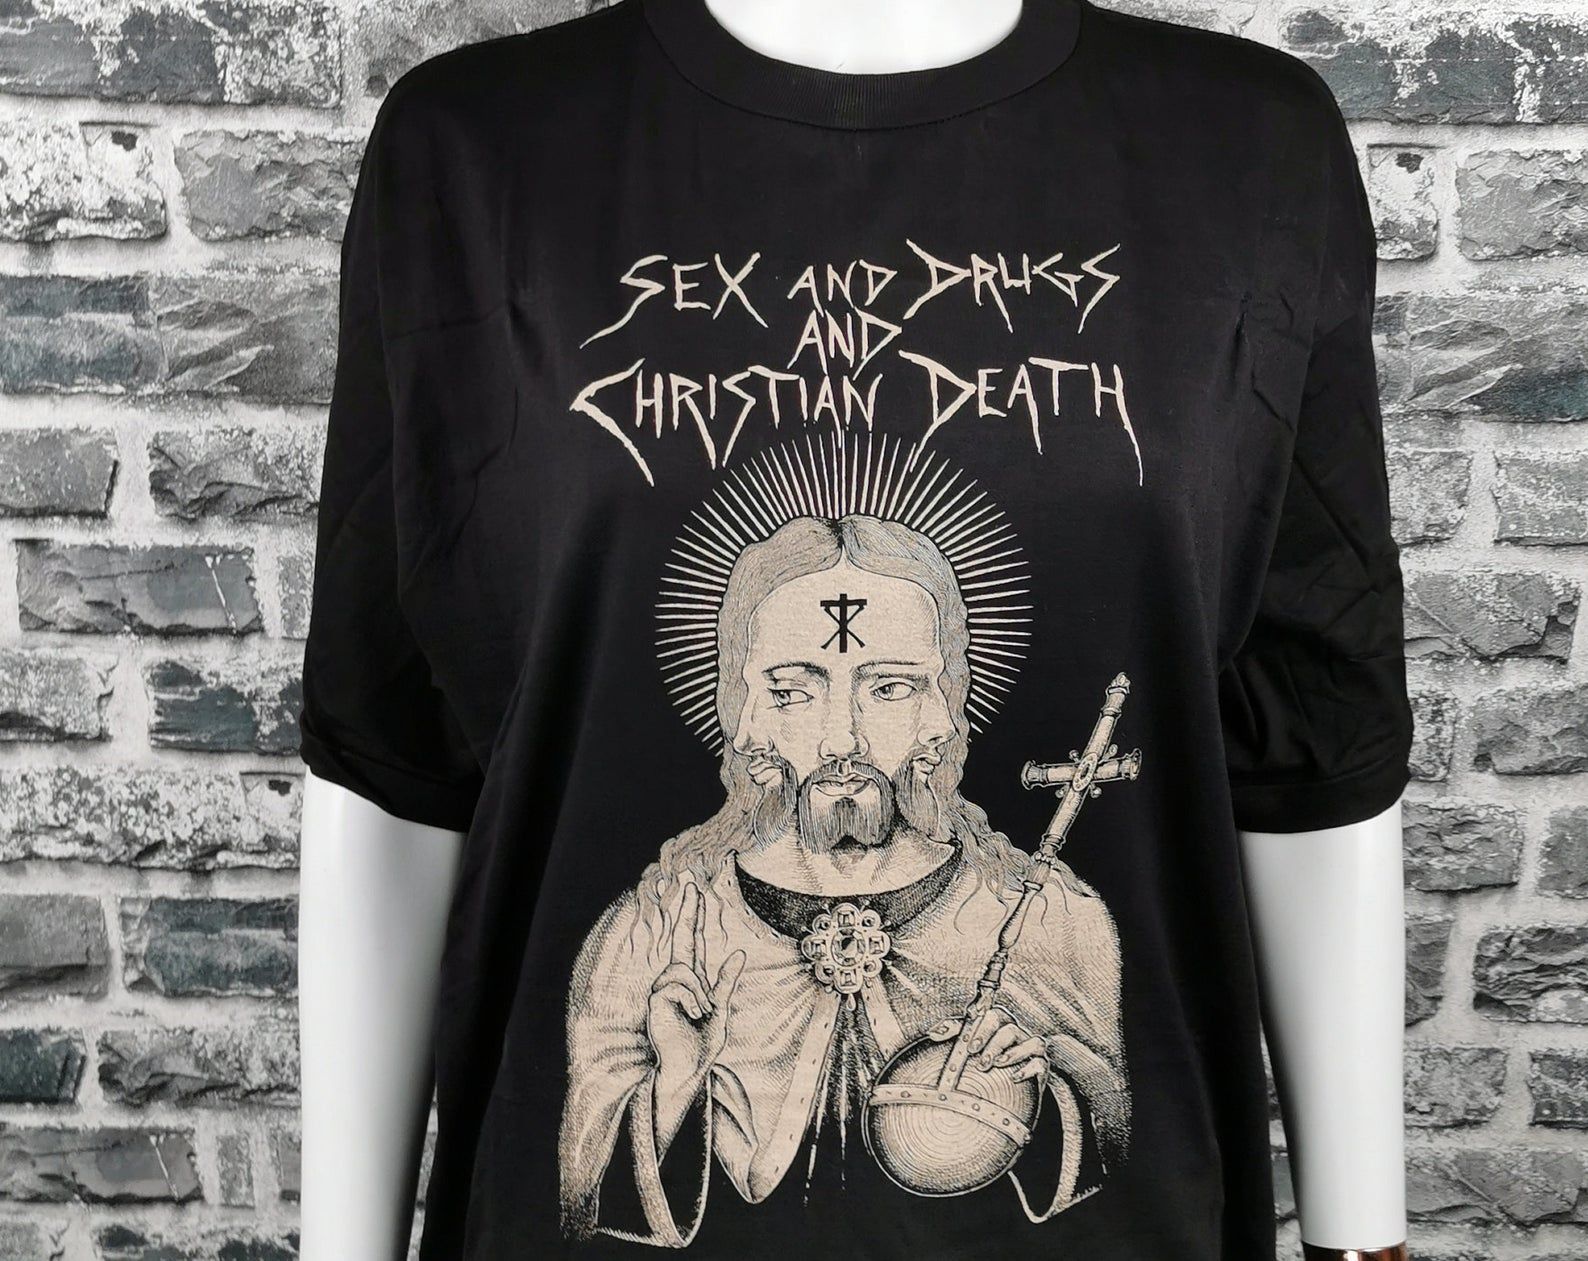 Christian Death 1988 Unworn Vintage T-Shirt Sex And Drugs And Christian ...